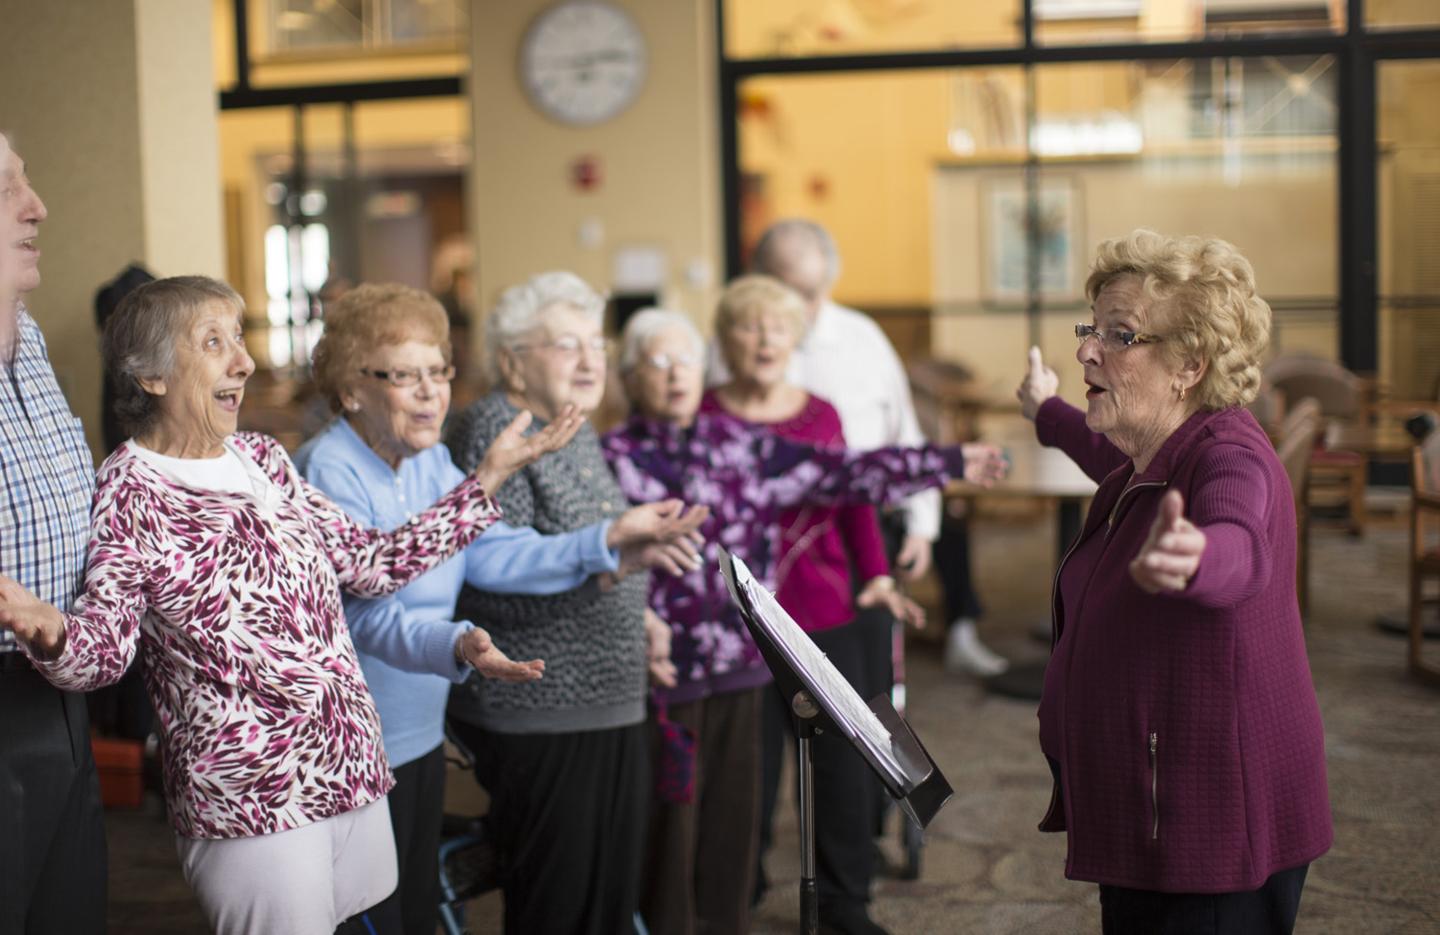 On the left is a line of older women and men who are singing. One of the women has her arms outstretch. On the right facing them is another older woman who is conducting them.